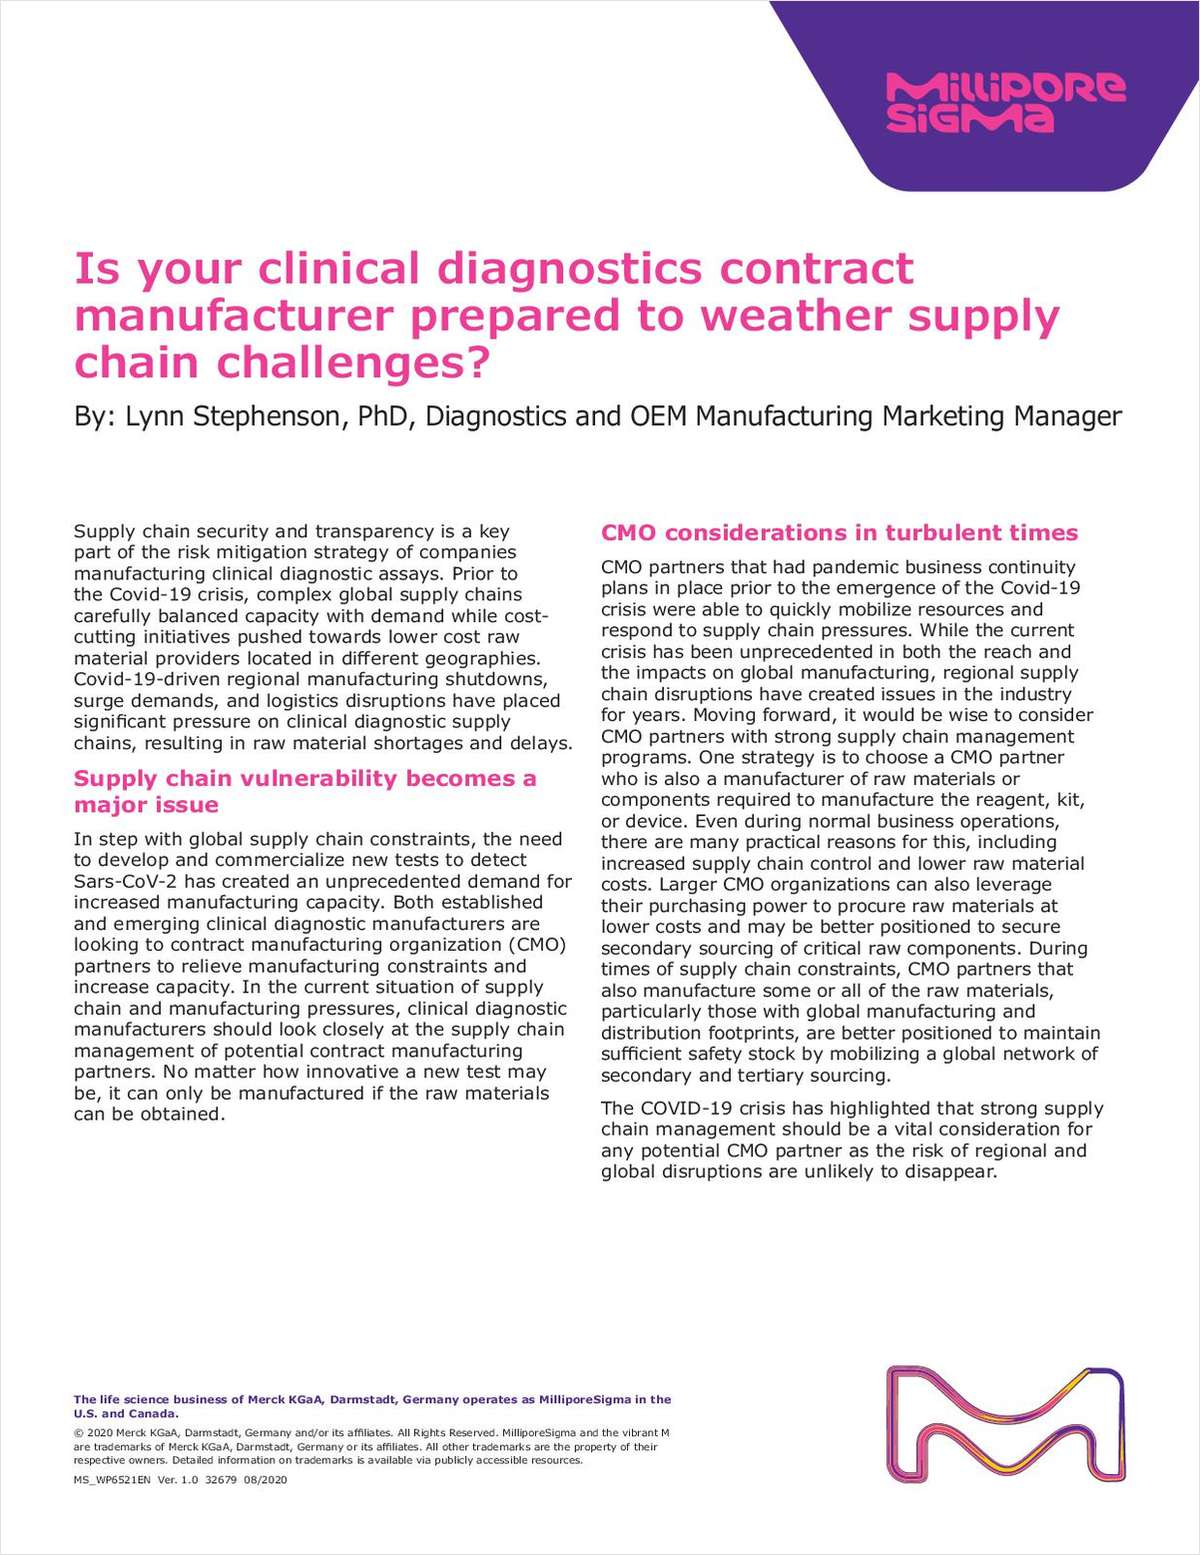 Is Your Clinical Diagnostics Contract Manufacturer Prepared to Weather Supply Chain Challenges?